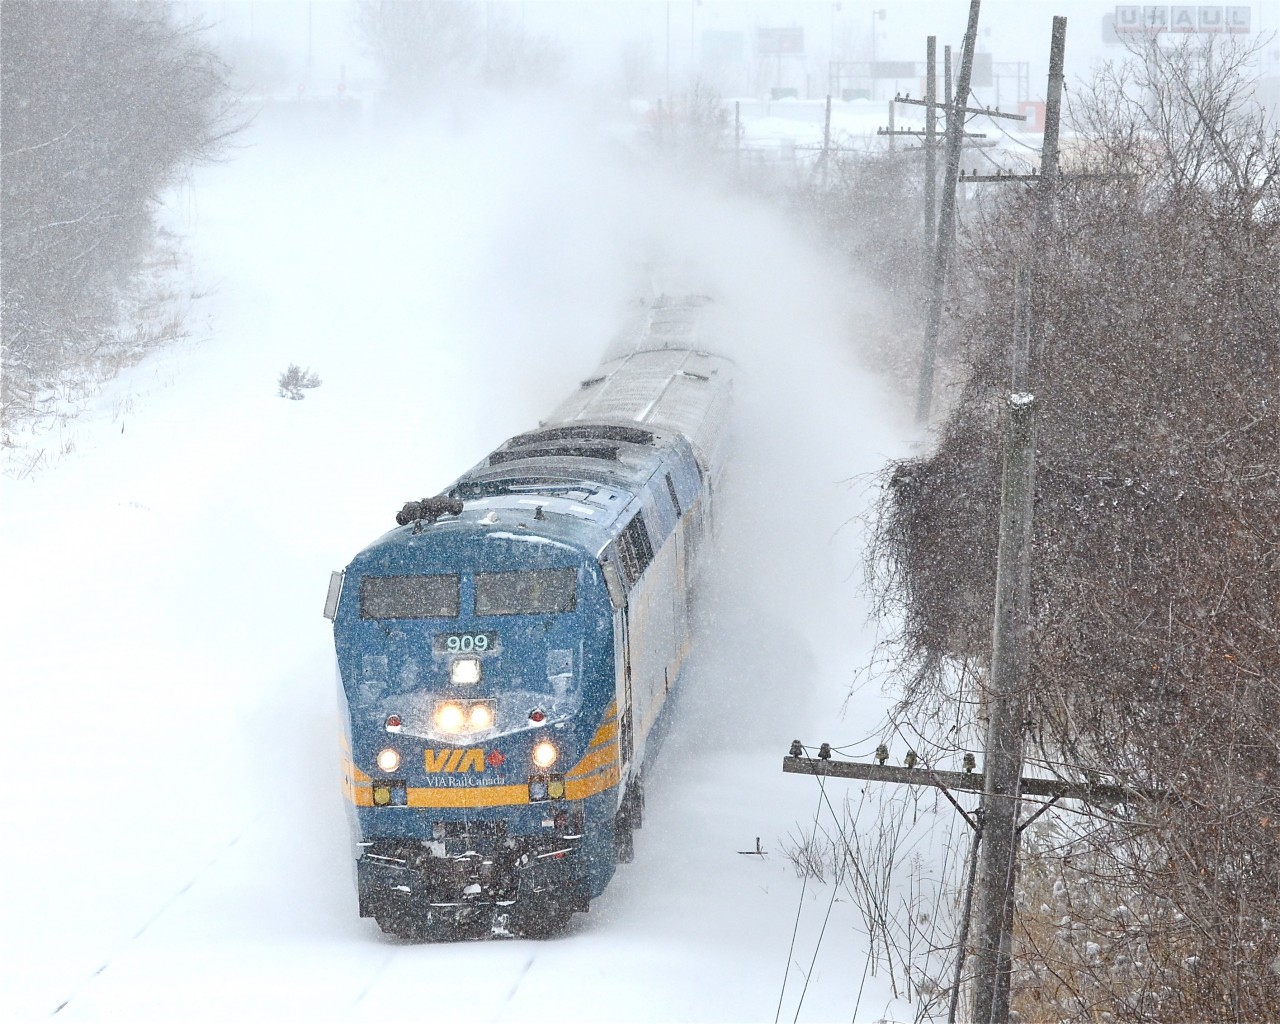 In the midst of a major snowstorm, VIA 61 heads west led by VIA 909. For more train photos, check out http://www.flickr.com/photos/mtlwestrailfan/